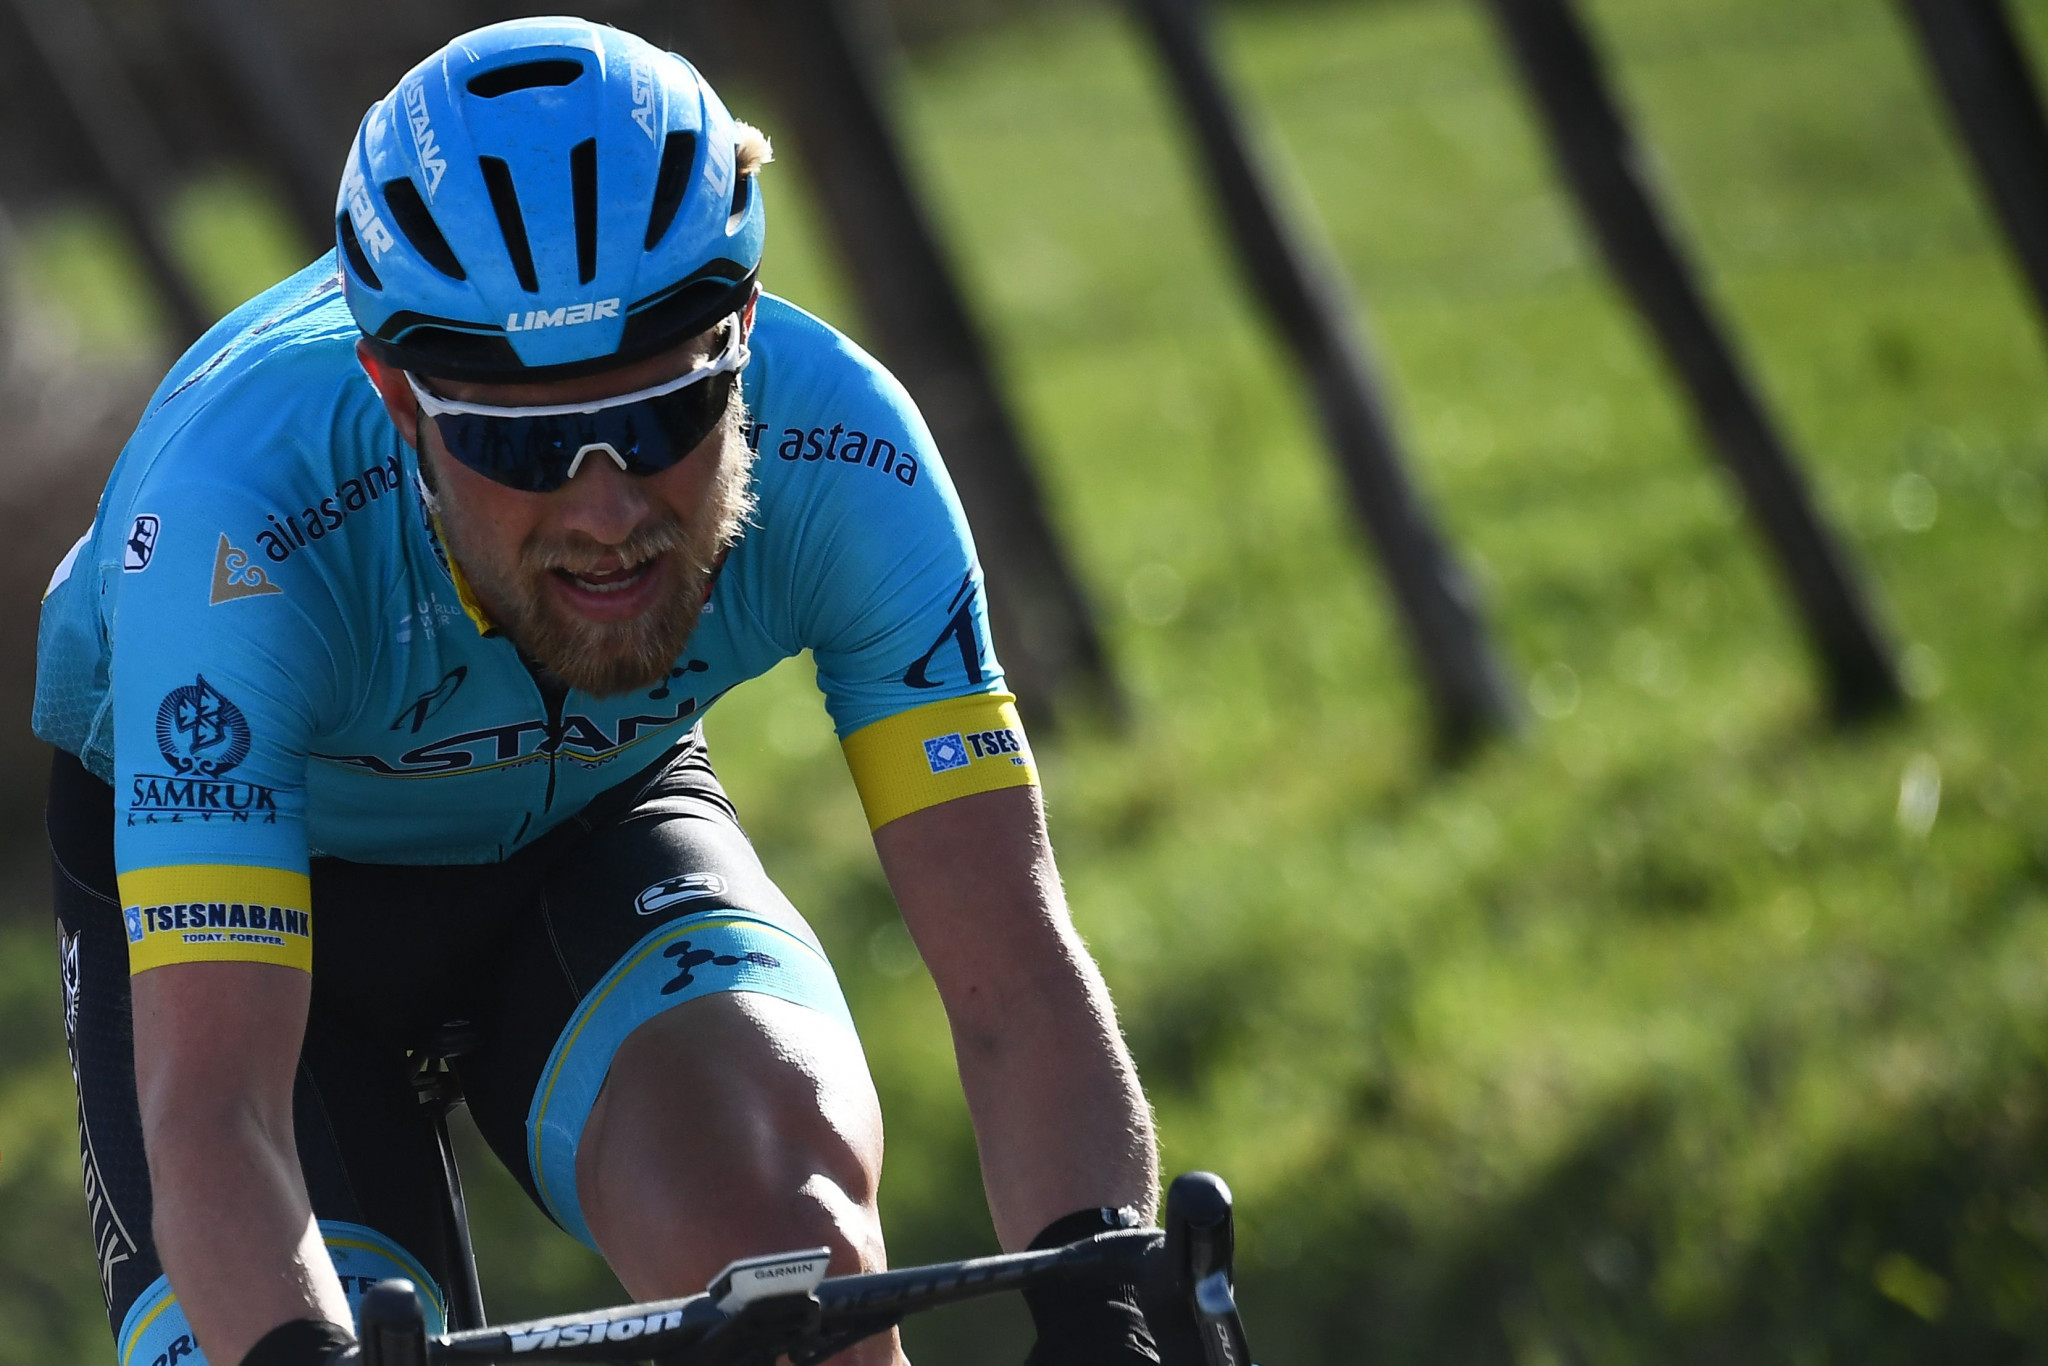 Cort cannot be caught as he wins Paris-Nice stage four